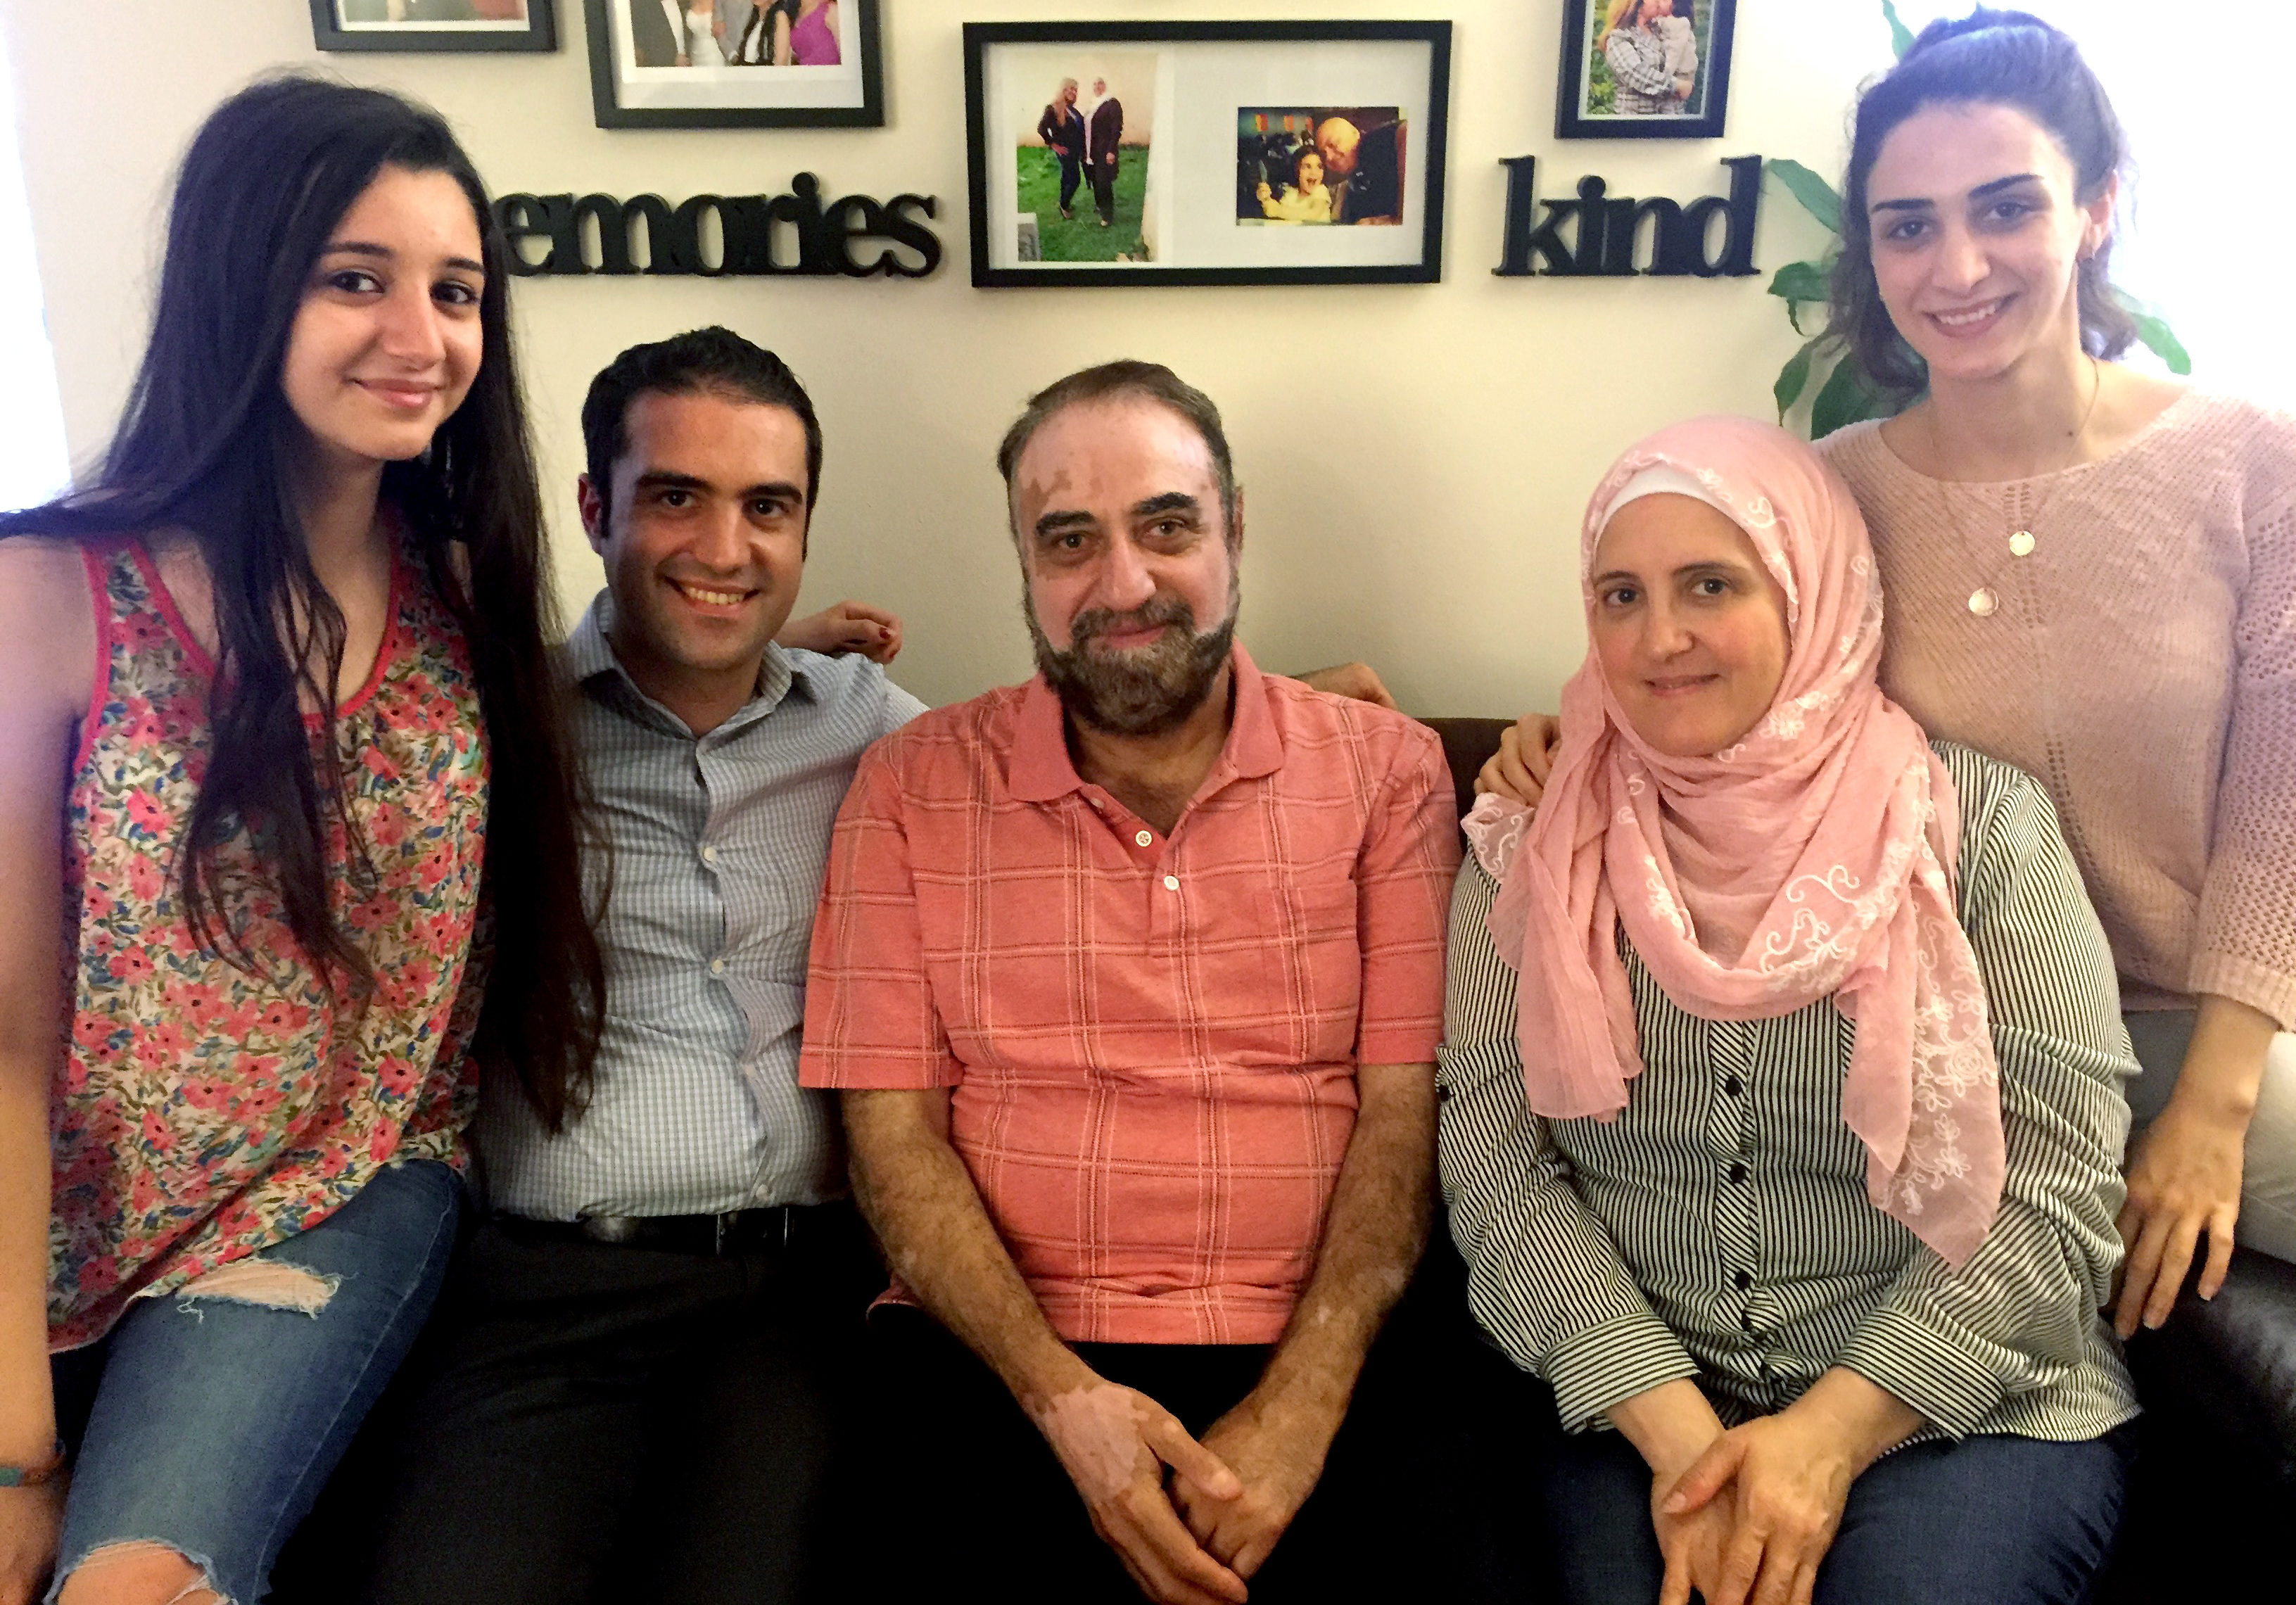 Almothana Alhamoud (second from left) with his family in Chicago. From left to right are his sister, Fatina; their father, Abdel Bari; their mother, Alia; and his other sister, Rowan. Alhamoud earned a computer engineering degree in Syria, but when he came to the U.S., he initially worked as a cashier. The group Upwardly Global helped him find a job in IT. (Photo by Deb Amos/NPR)